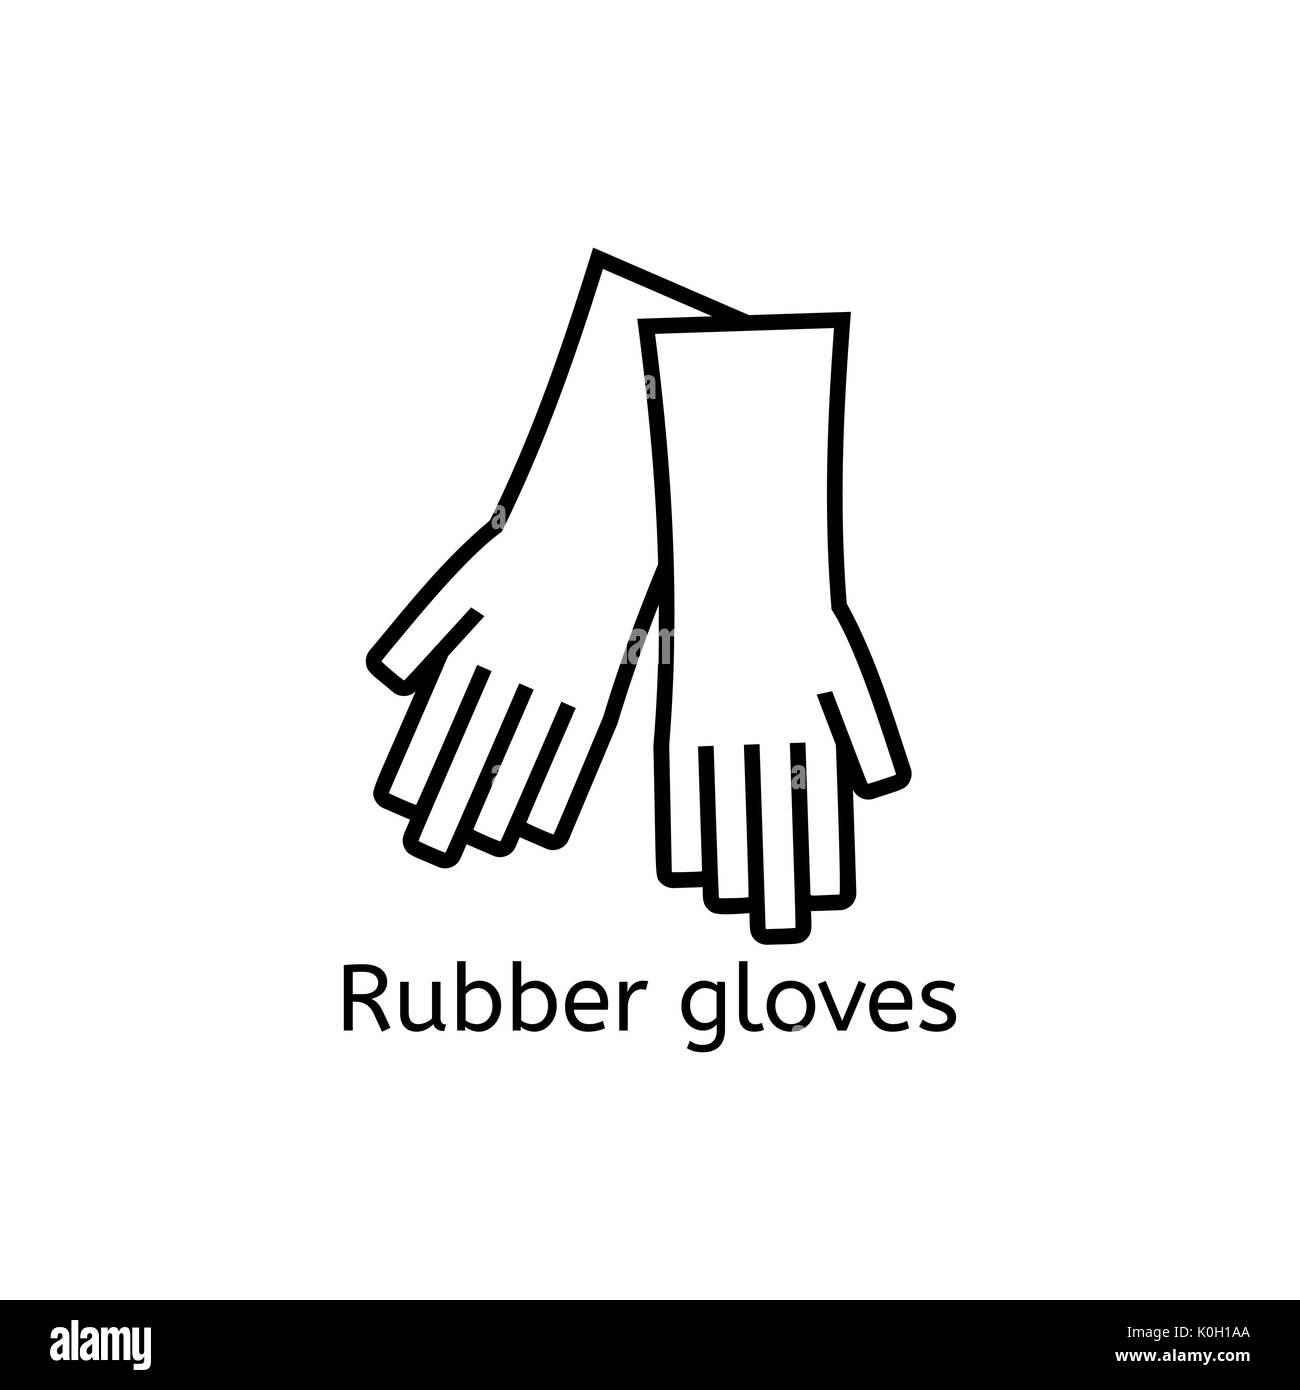 Rubber gloves simple line icon. Protective medical latex glovev thin linear signs. Concept for websites, infographic, mobile app Stock Photo